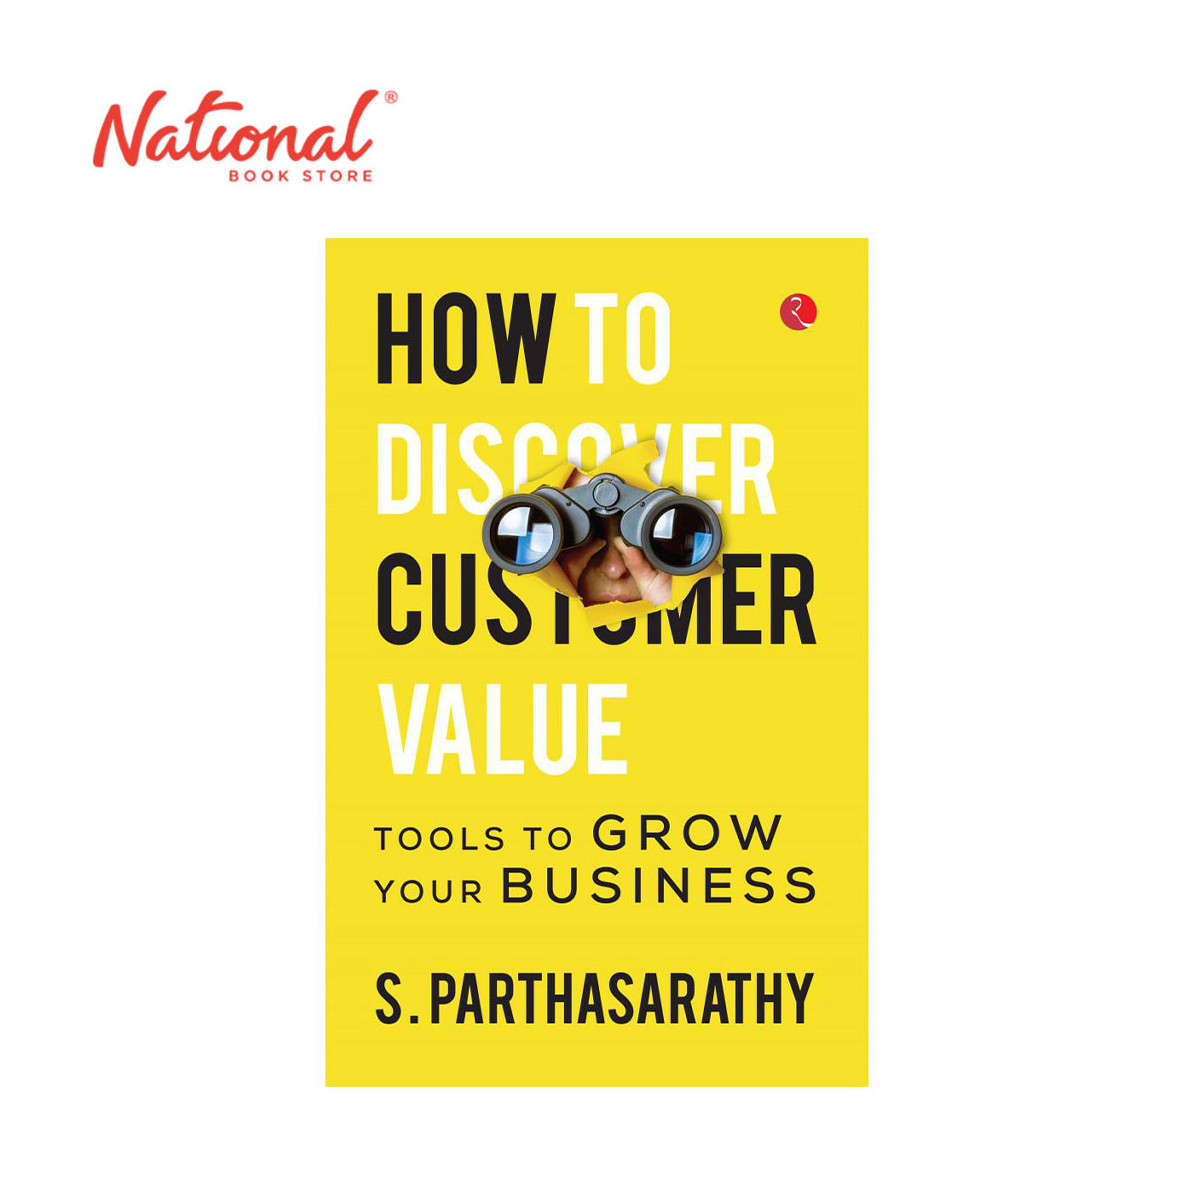 How To Discover Customer Value by S. Parthasarathy - Trade Paperback - Marketing Books